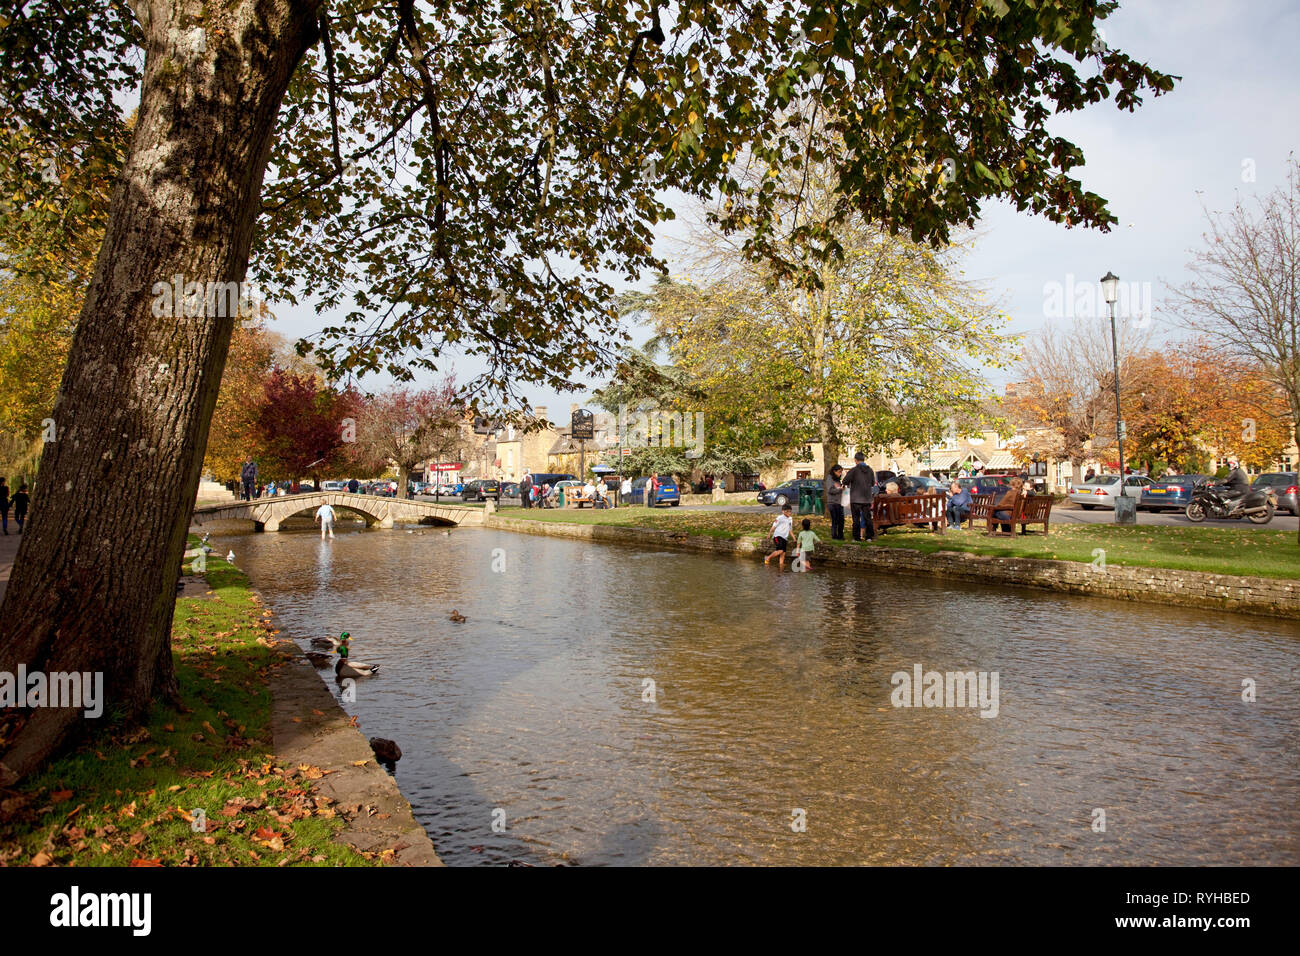 The village of Bourton-on-the-Water with the river Windrush, Gloucester, England Stock Photo